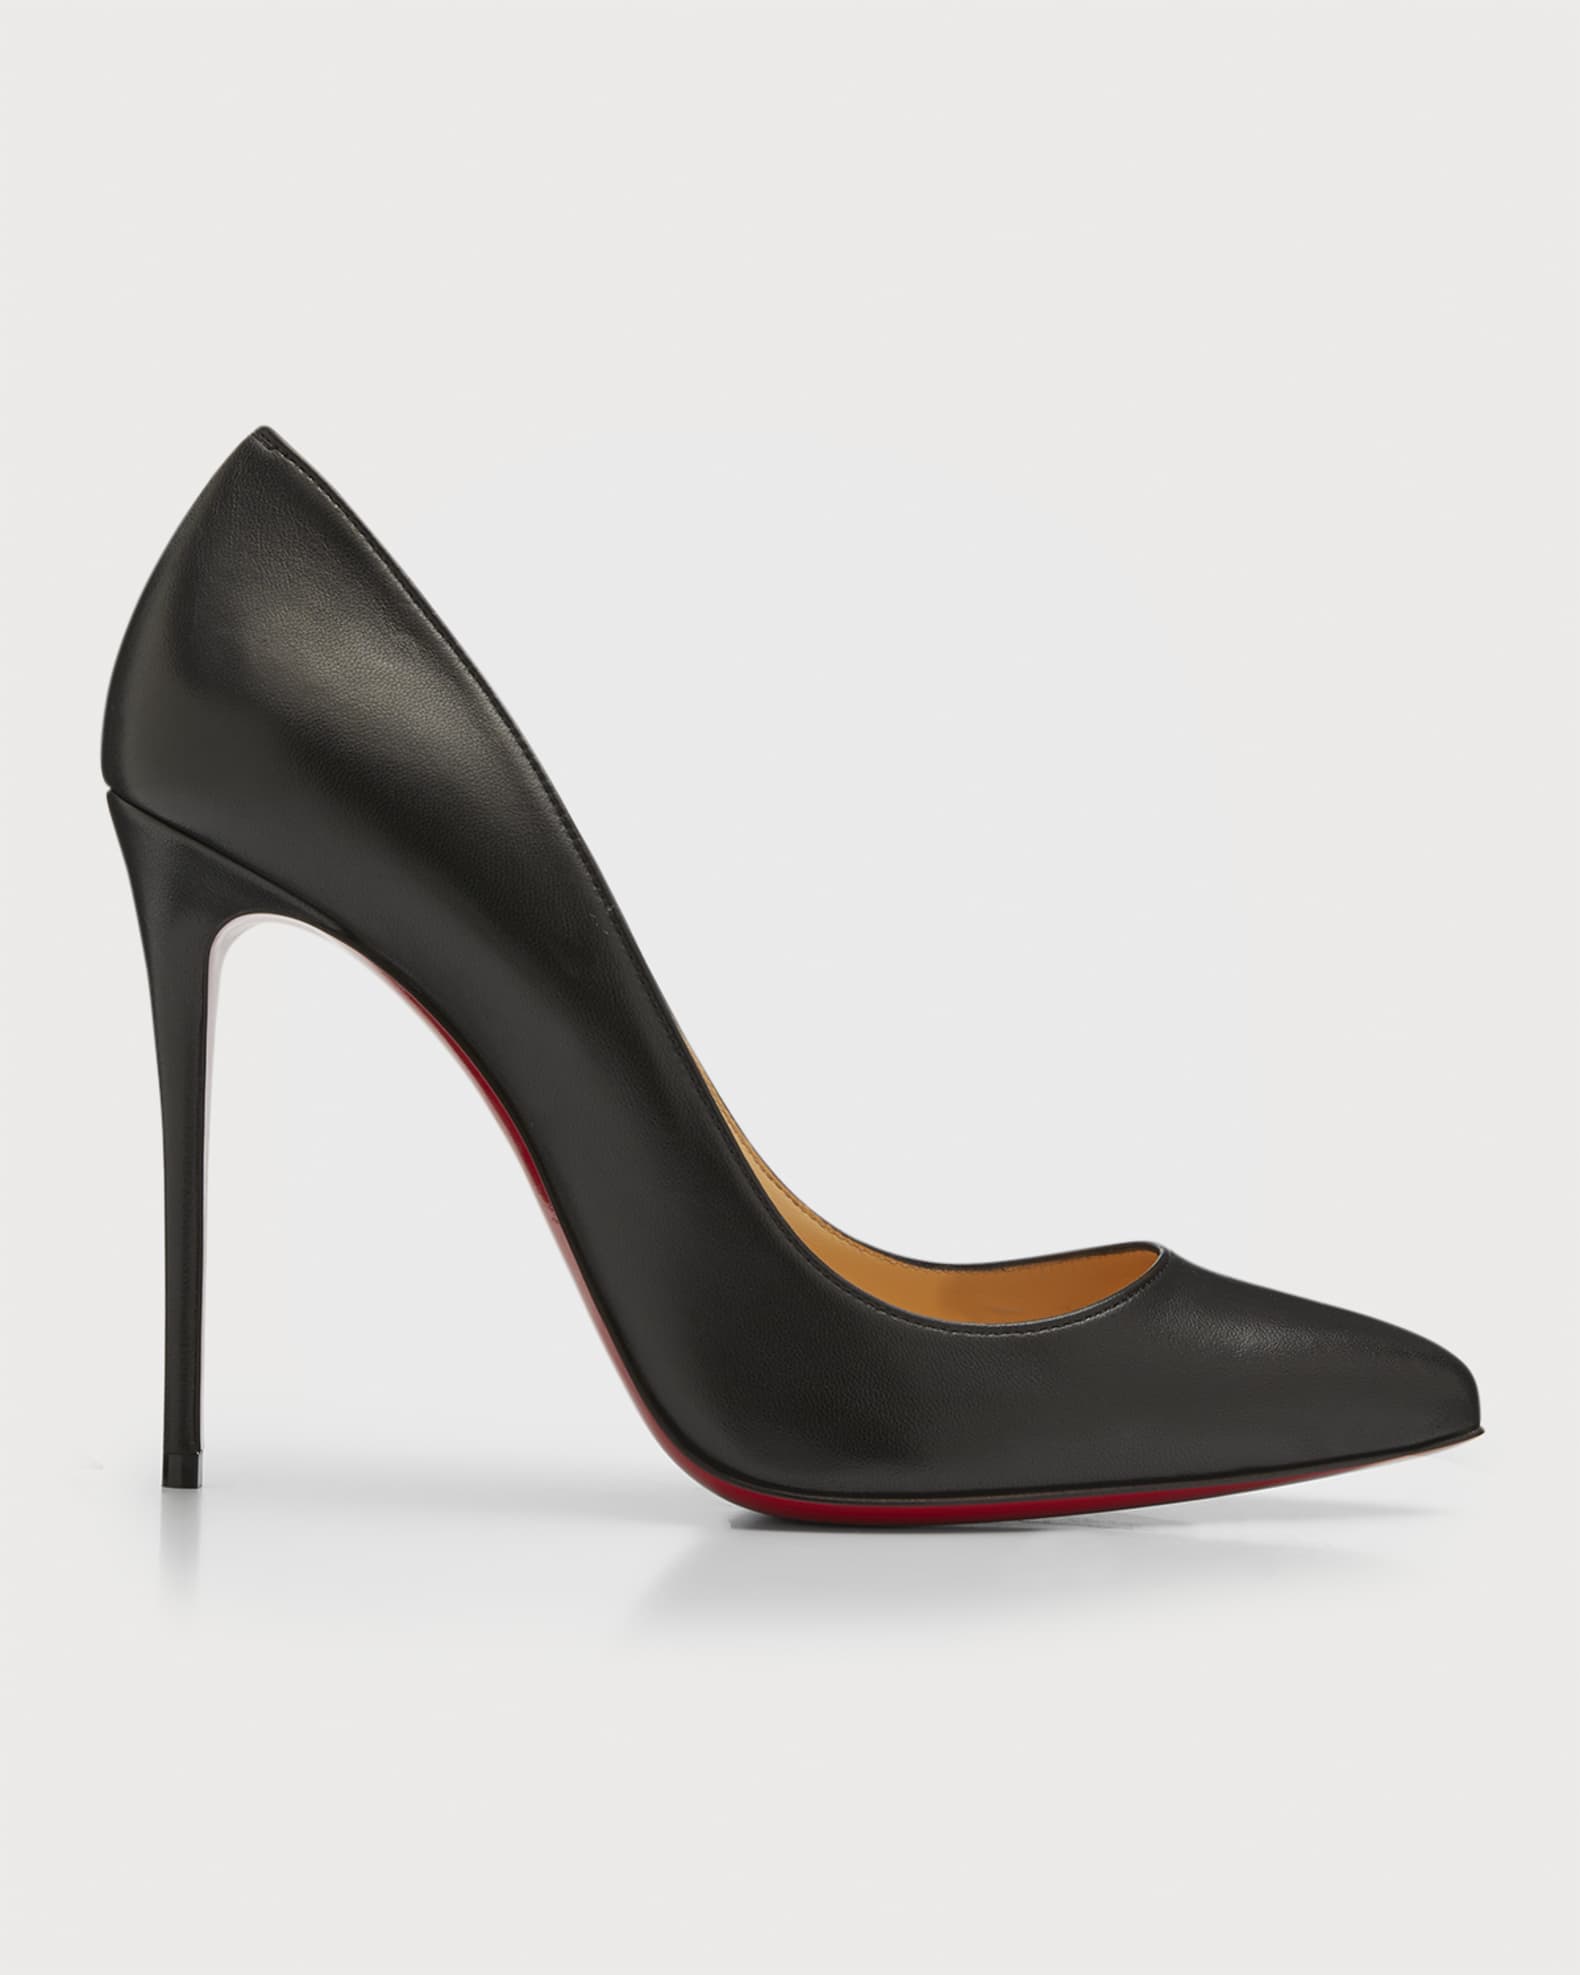 Christian Louboutin Pigalle Leather 100mm Red Sole High-Heel Black | Neiman Marcus